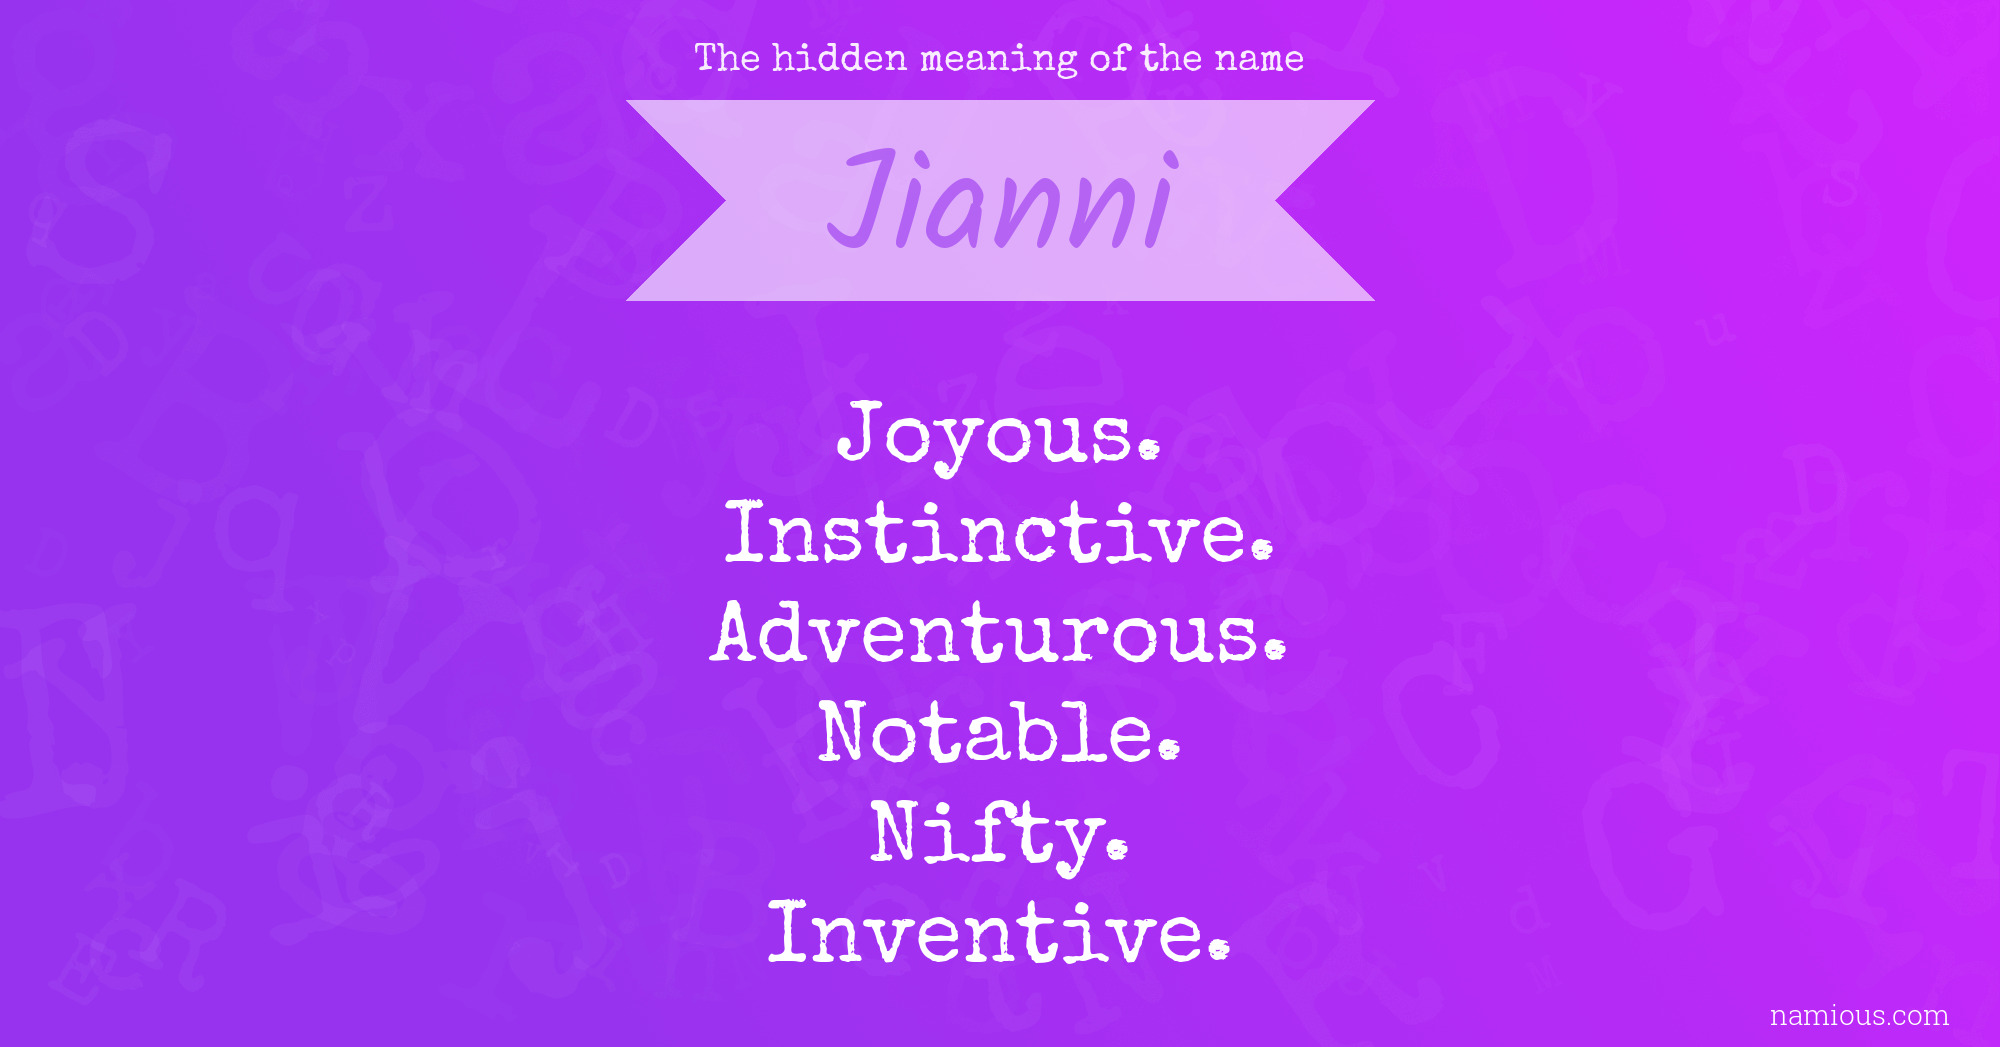 The hidden meaning of the name Jianni